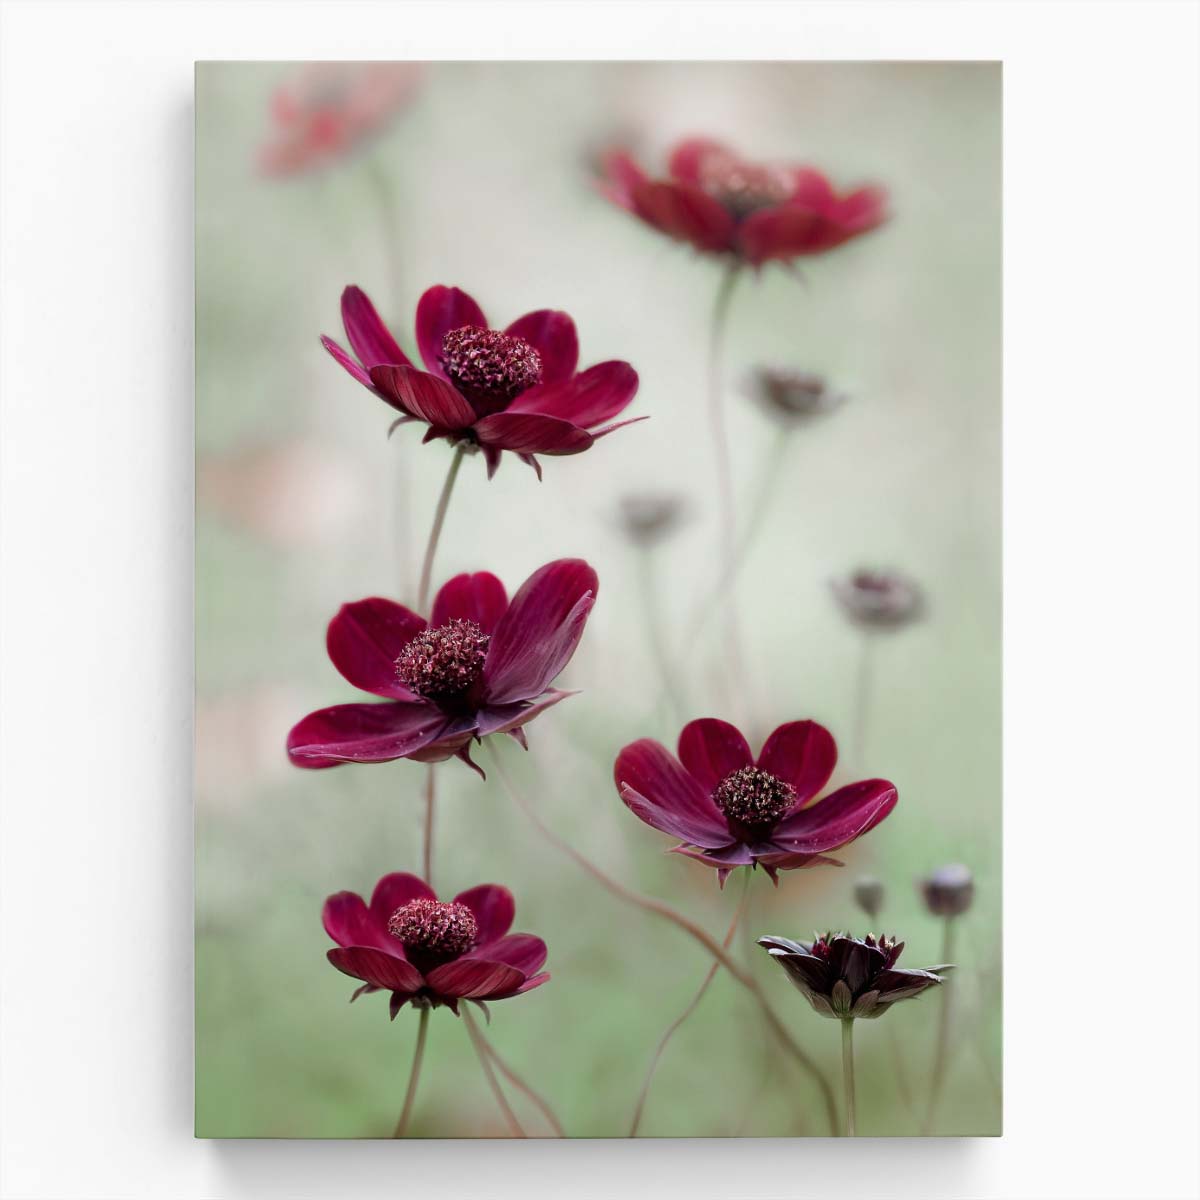 UK Summer Garden Macro Photography Red Cosmos Flowers Close-Up by Luxuriance Designs, made in USA